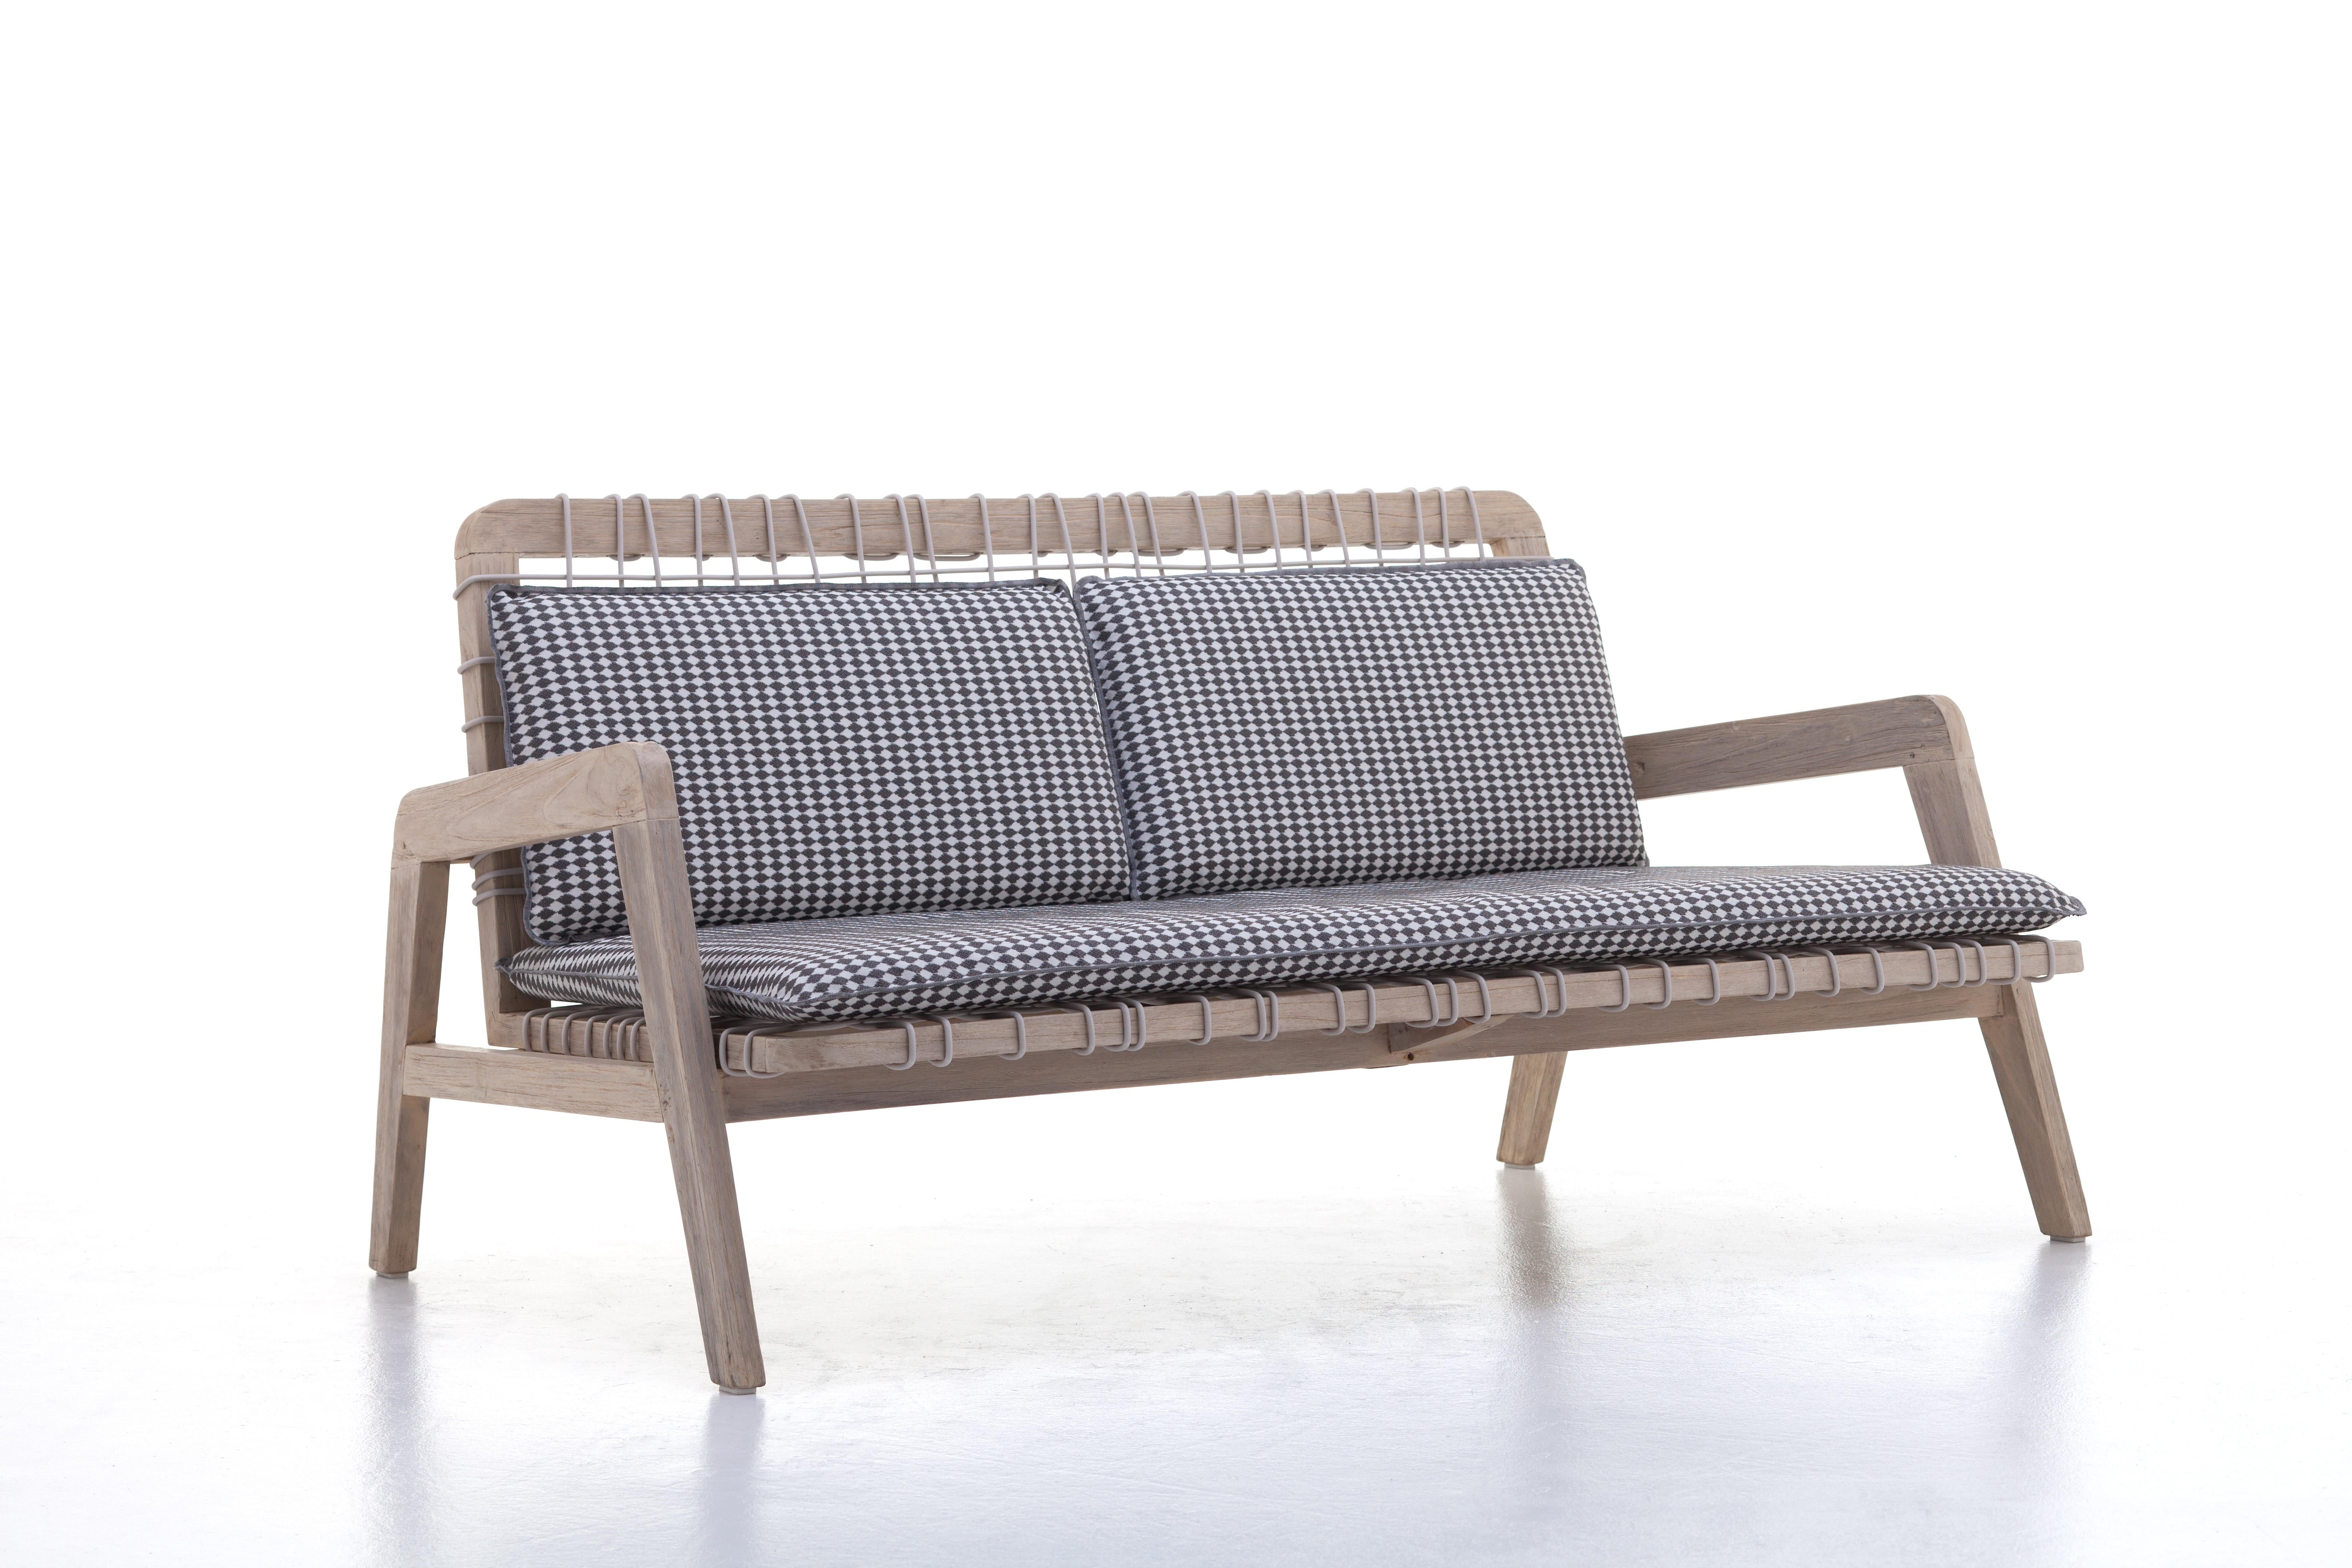 Family of one-seater or two-seater sofas, Inout 862/863 express a refined Nordic minimalism. They have a structure in Washed Teak, one of the finest tropical woods subjected to ageing treatment that determines the particular shade of grey of the